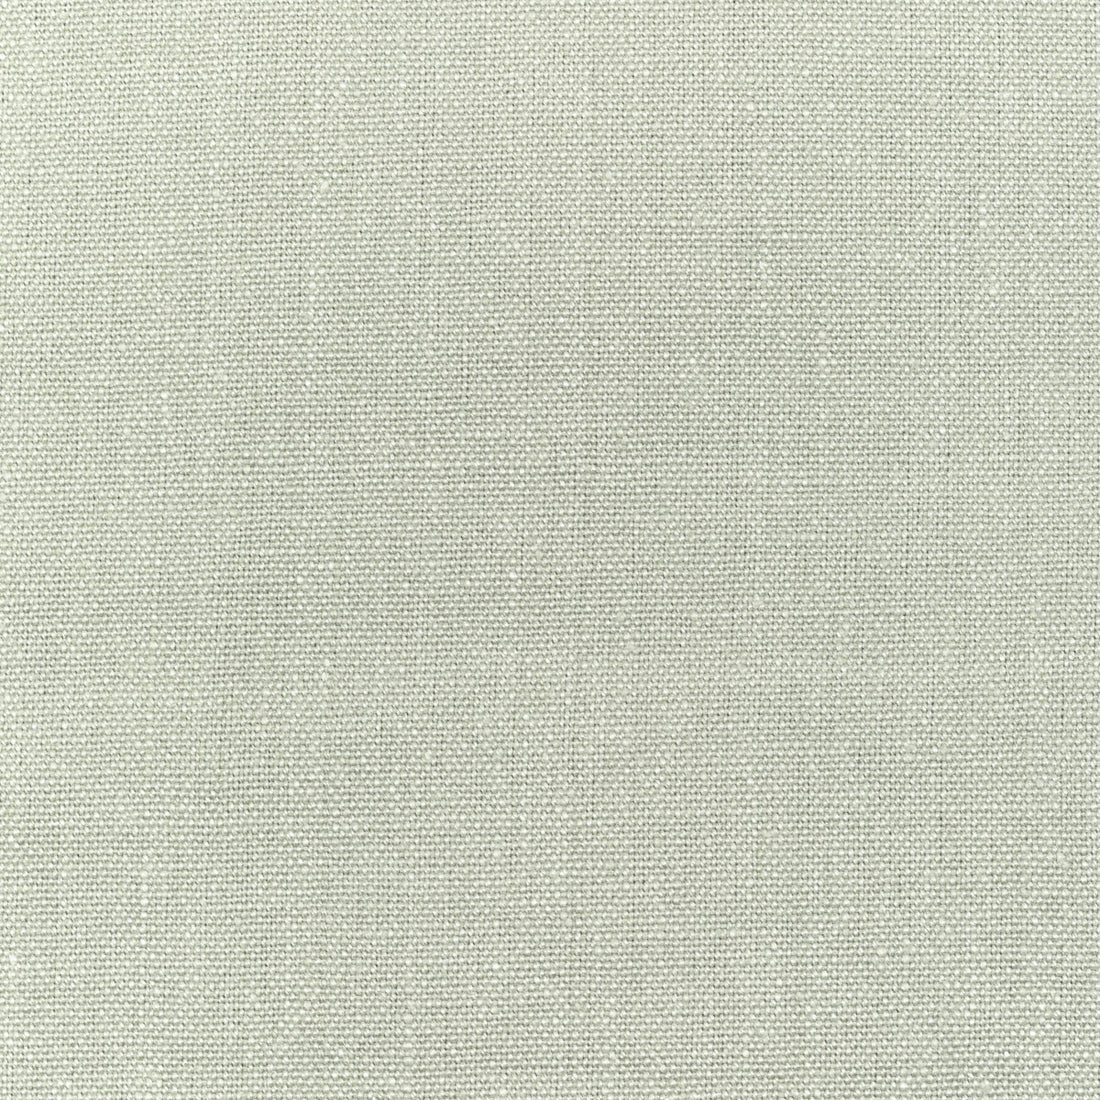 Watermill fabric in sky color - pattern 30421.115.0 - by Kravet Basics in the Perfect Plains collection